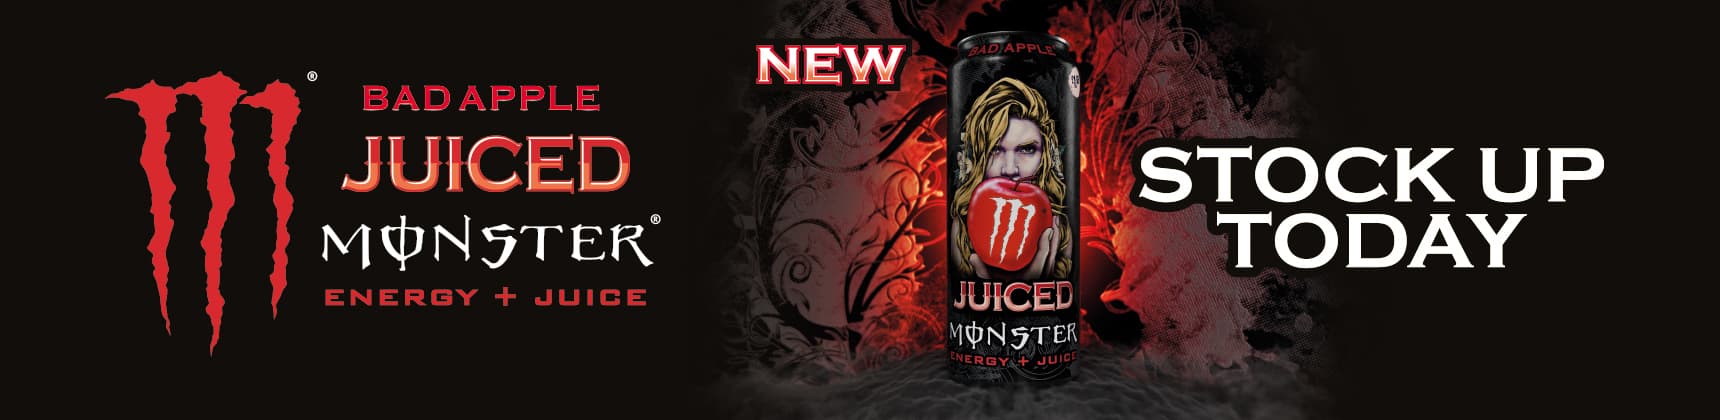 Bad Apple Juiced Monster - Stock up today